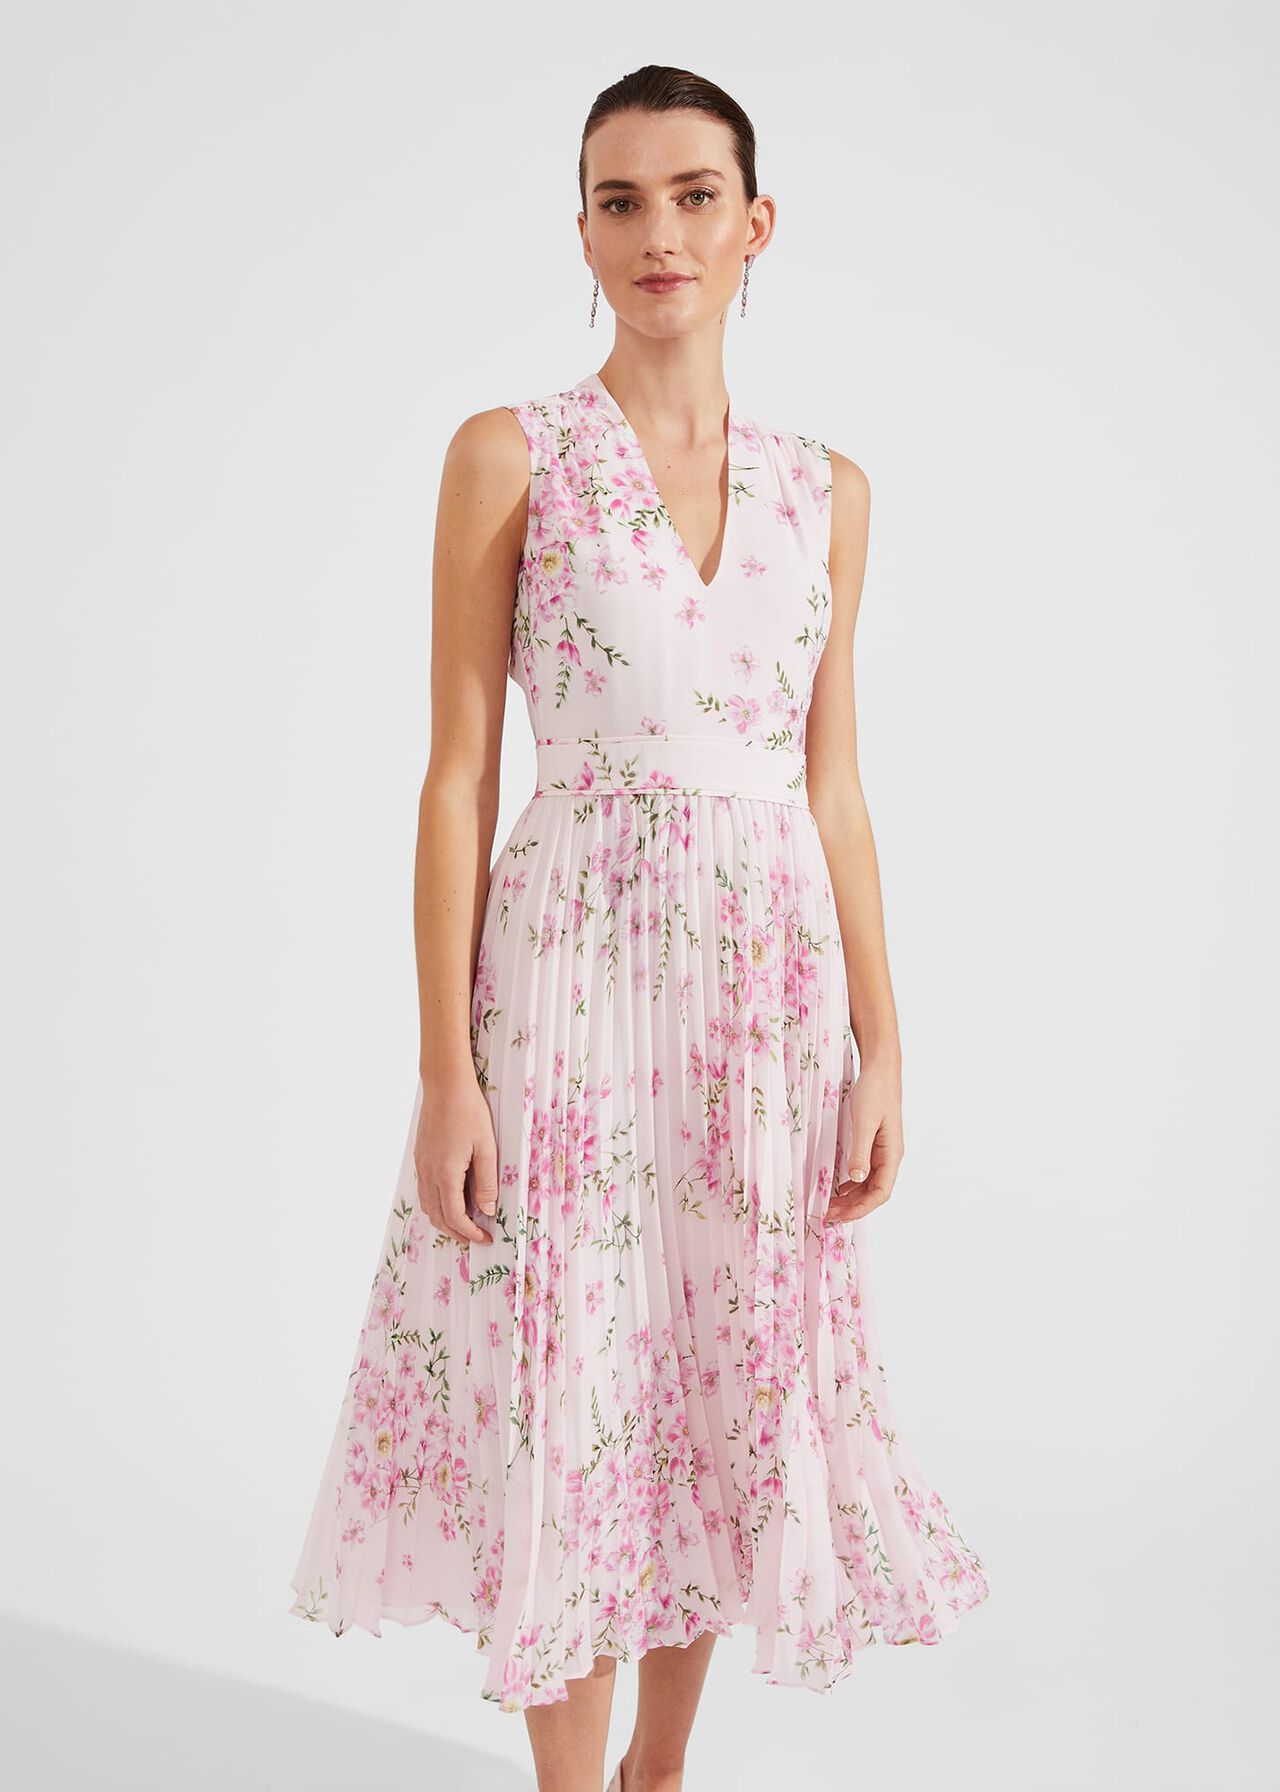 Veronica Pleated Floral Dress, Pink Multi, hi-res